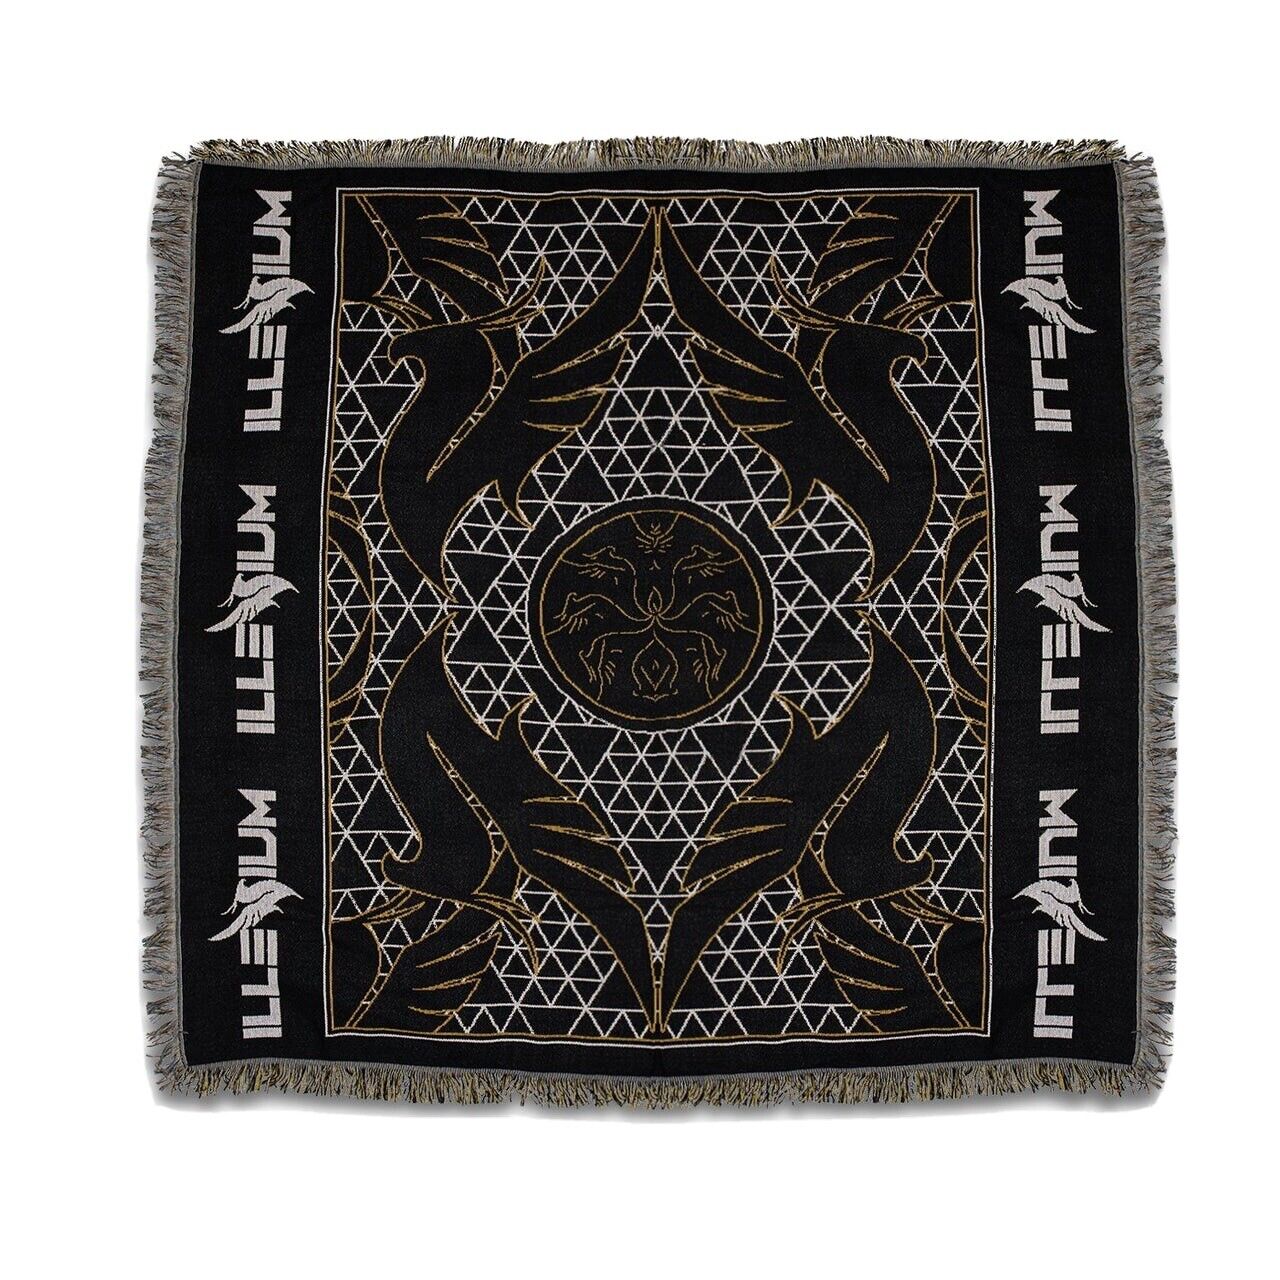 NEW ILLENIUM Hometown Classics Knit Woven Blanket SOLD OUT. Great Gift Comfy